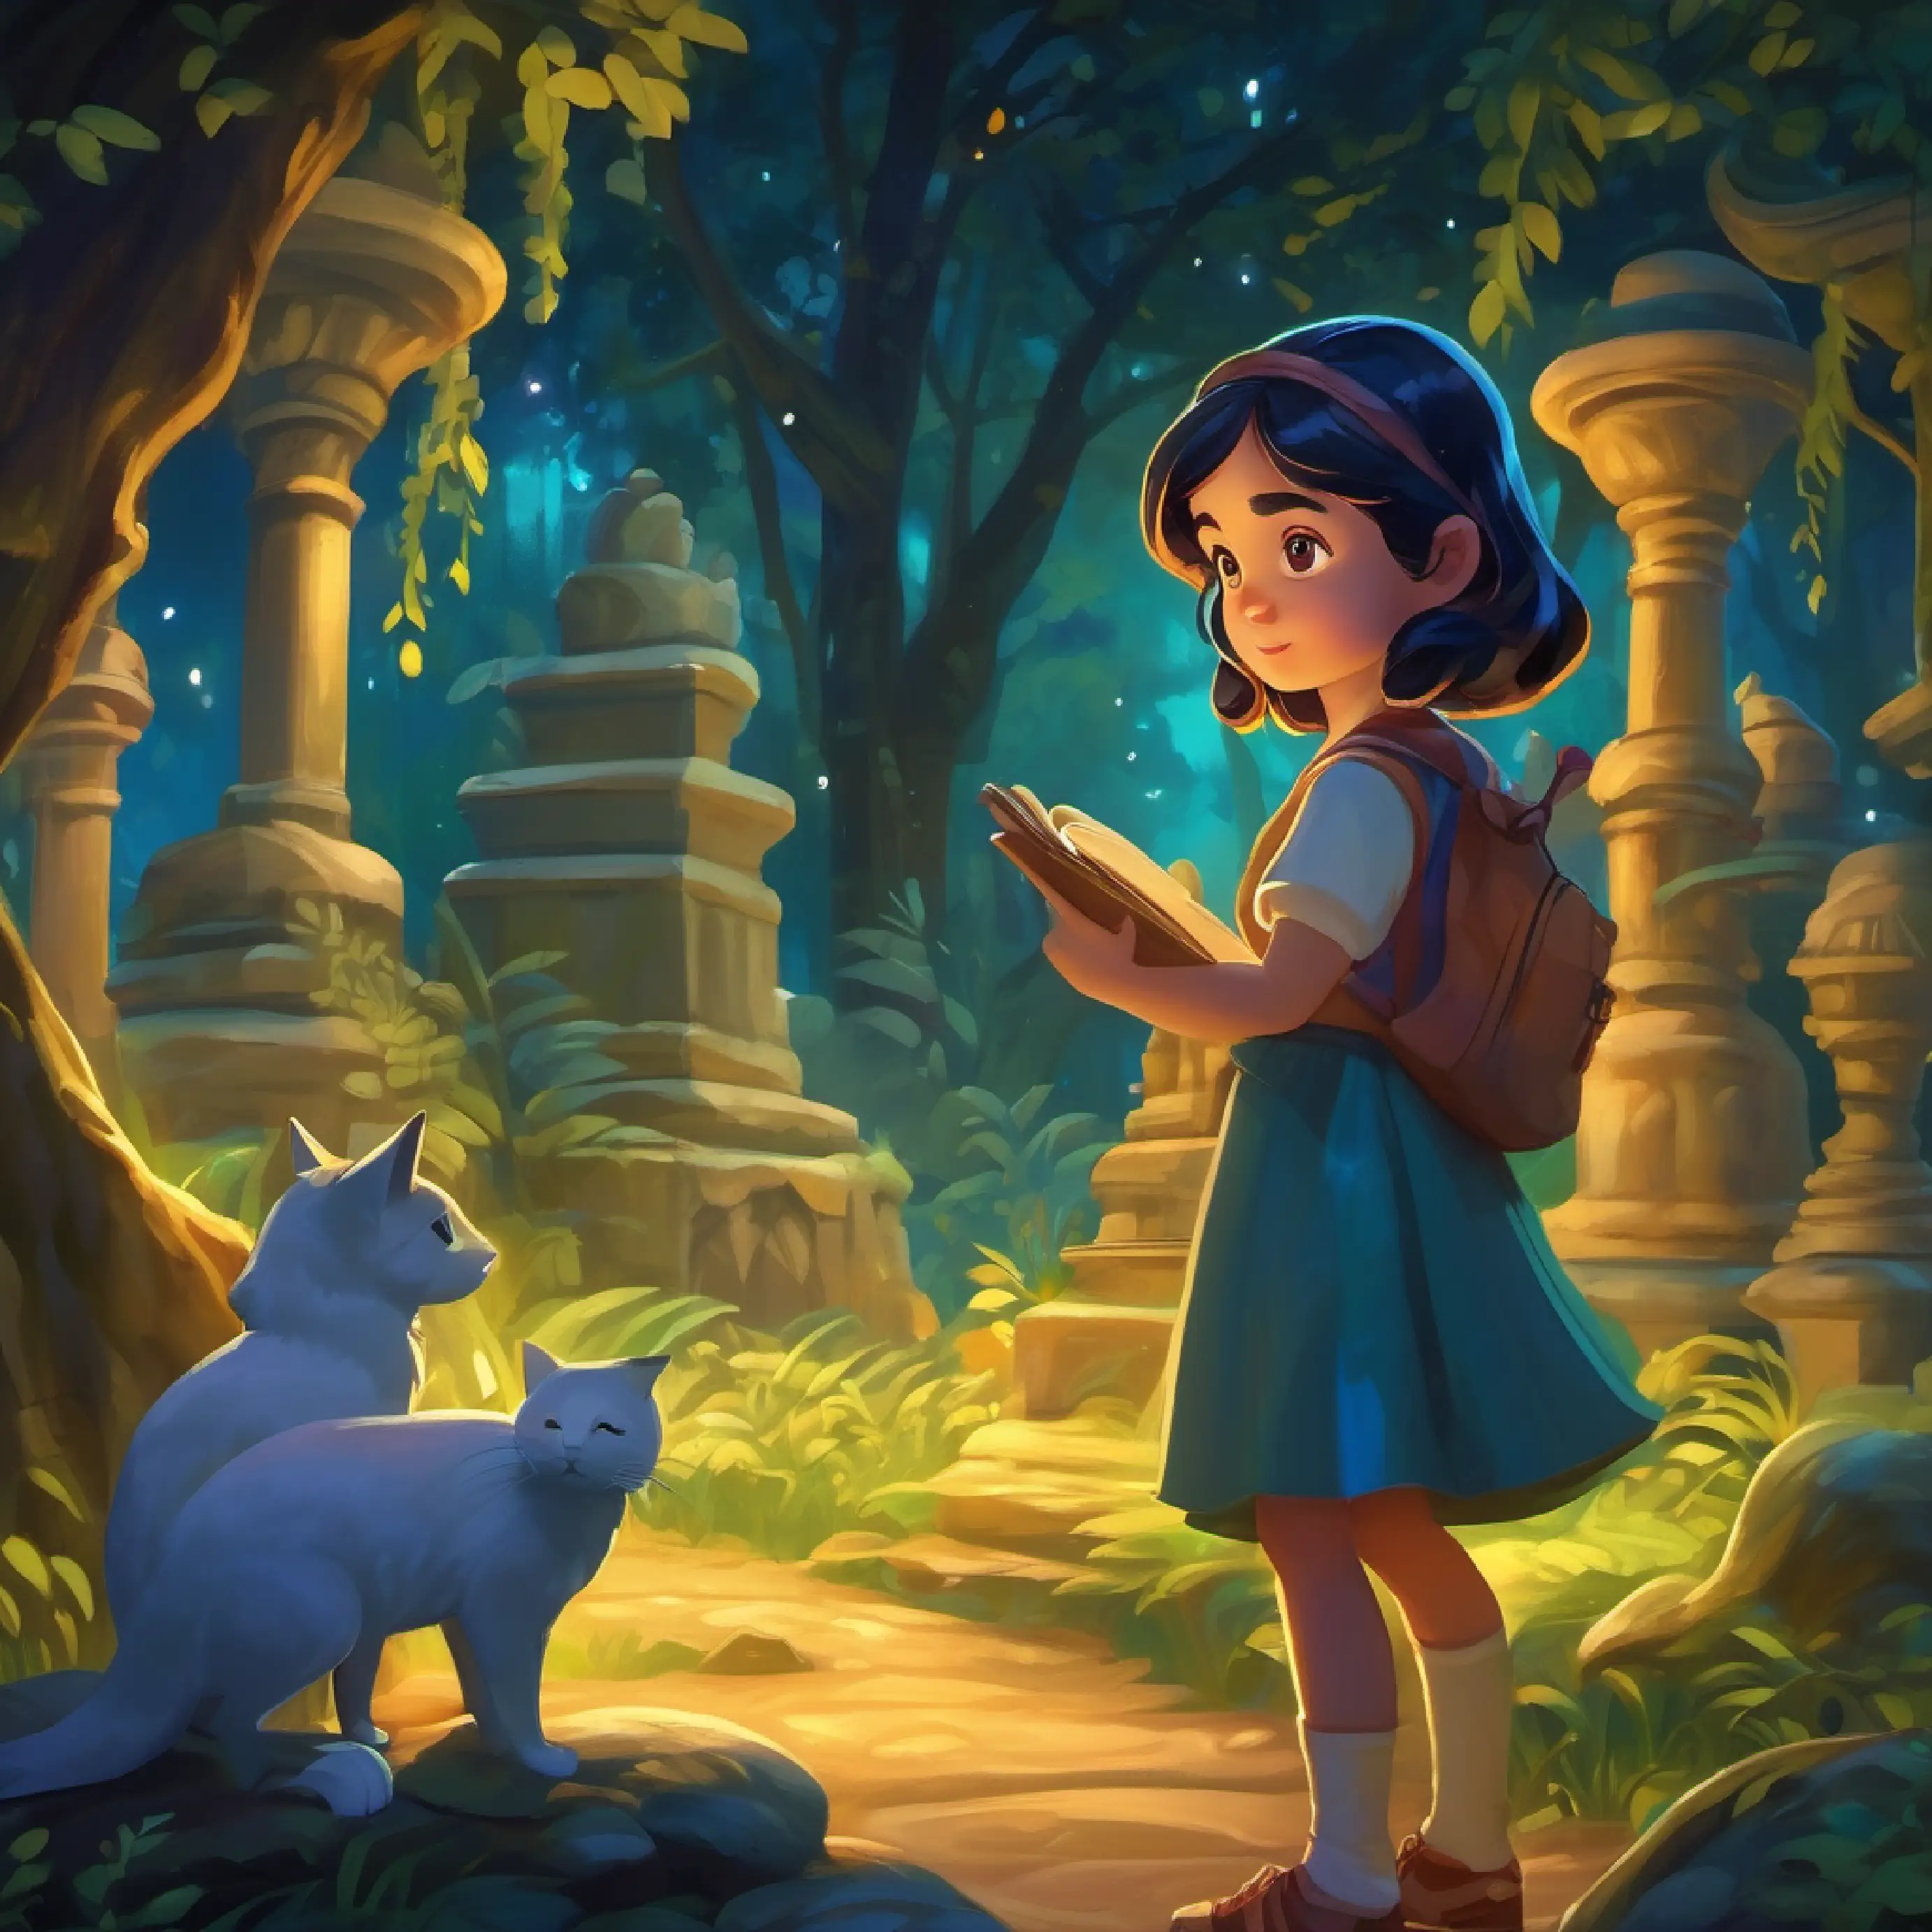 Curious girl, midnight hair, bright, sparkling eyes finds statues and scrolls in glade.